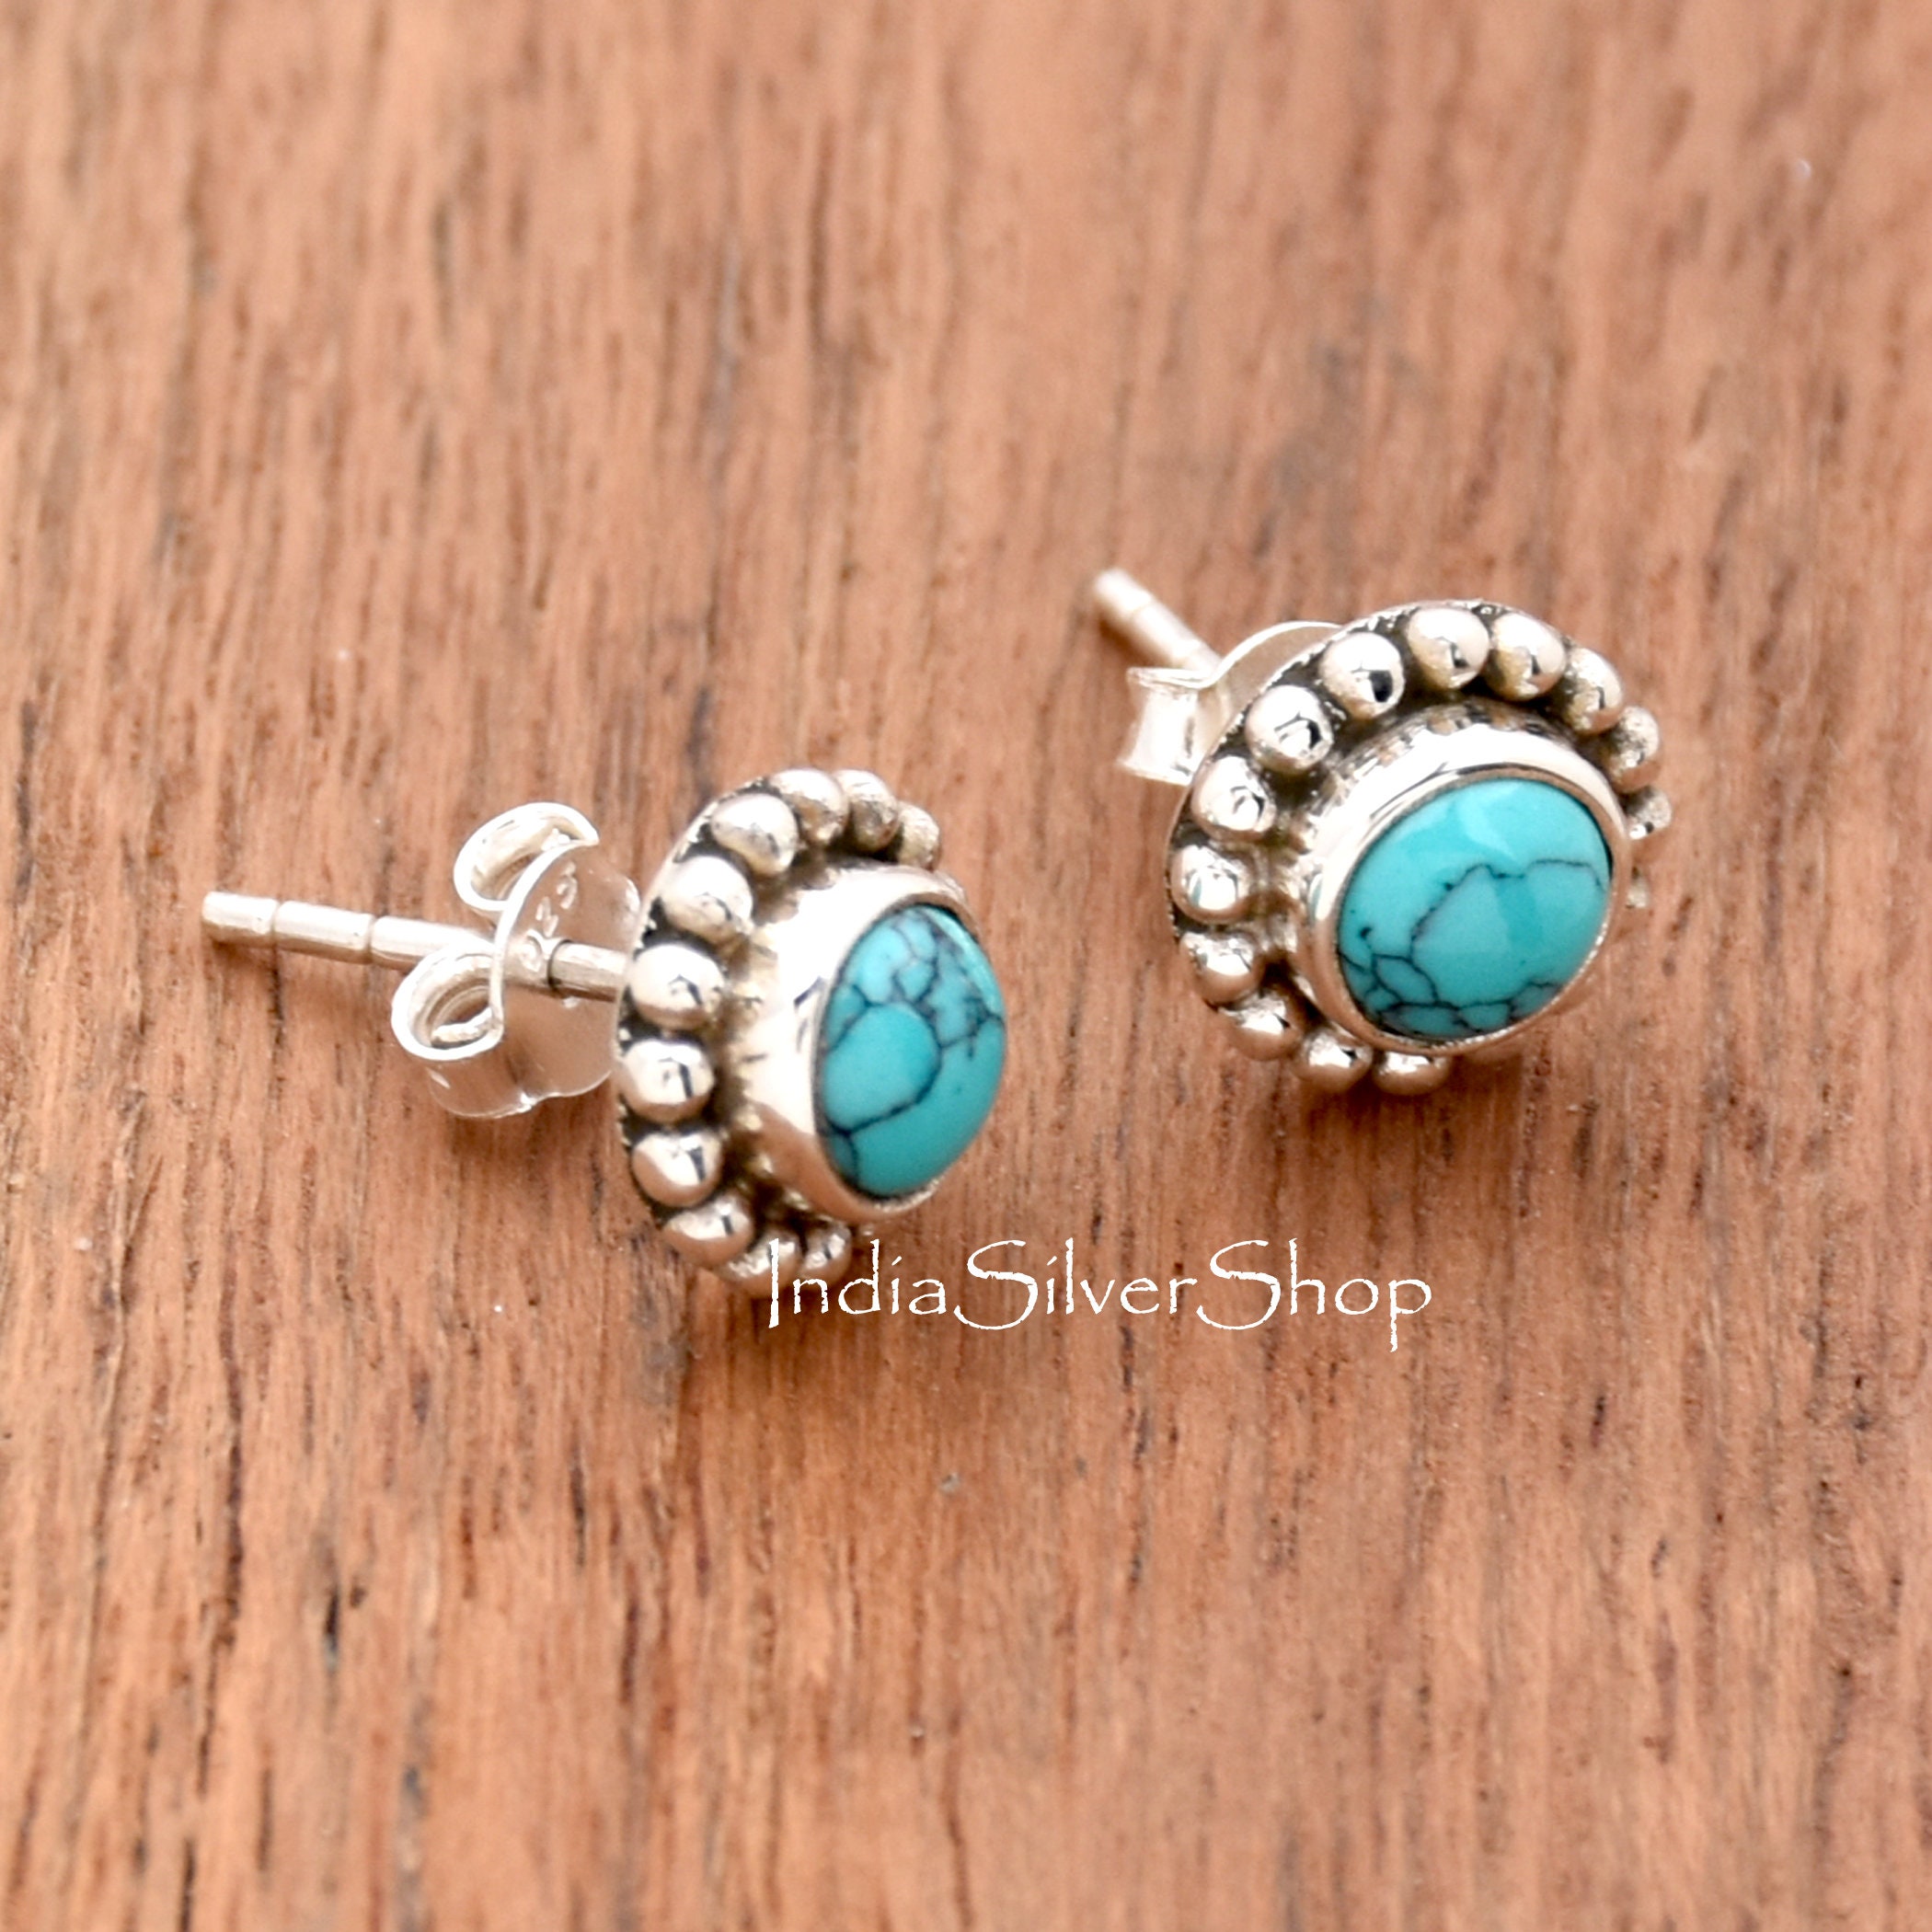 Discover 223+ turquoise stud earrings silver best